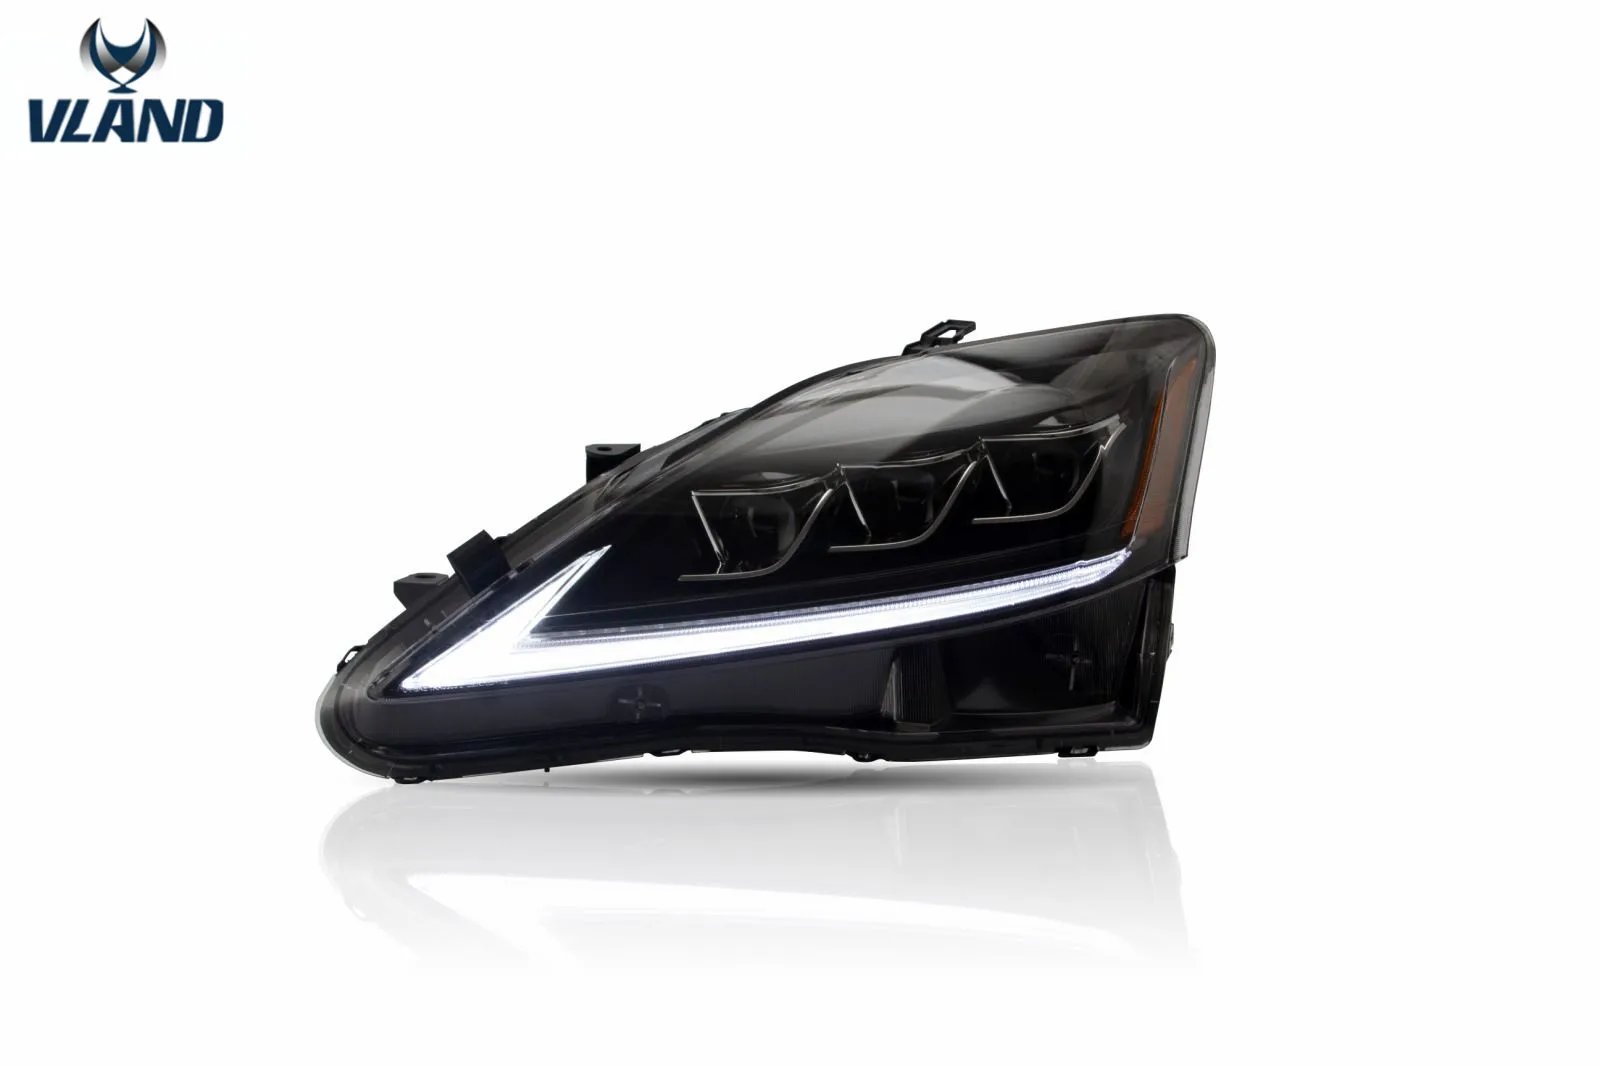 VLAND Factory Accessories For IS 250 Headlight 2006-2012 For IS350 Full LED For IS 300 Head Light With Moving Turn Signal